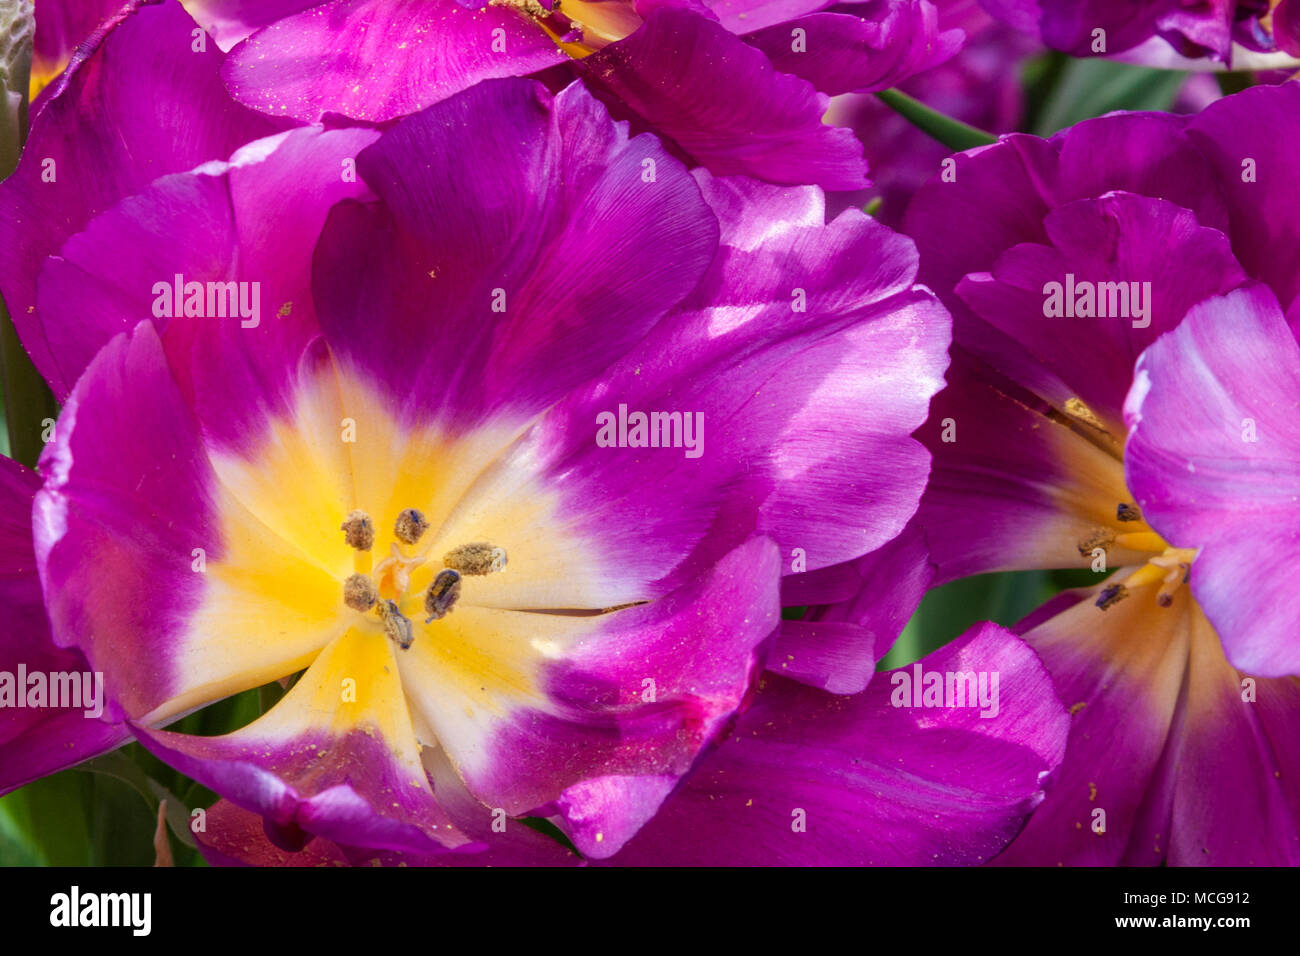 Double Late Tulip, Tulipa 'NR 401', at the Keukenhof Gardens in South Holland, The Netherlands. Stock Photo